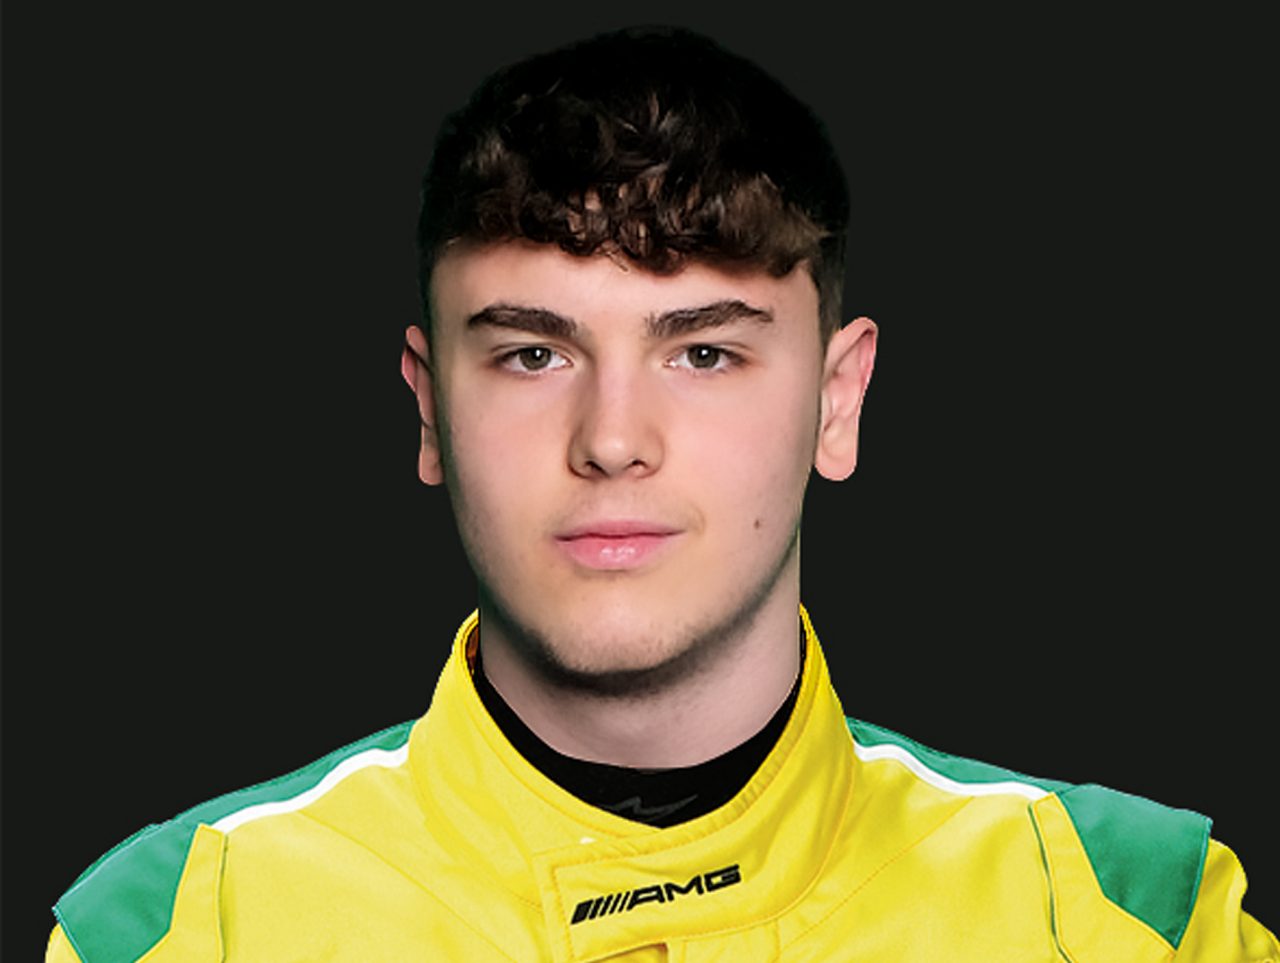 The young MANN-FILTER driver talent Lorenzo Ferrari in his yellow-green race suite